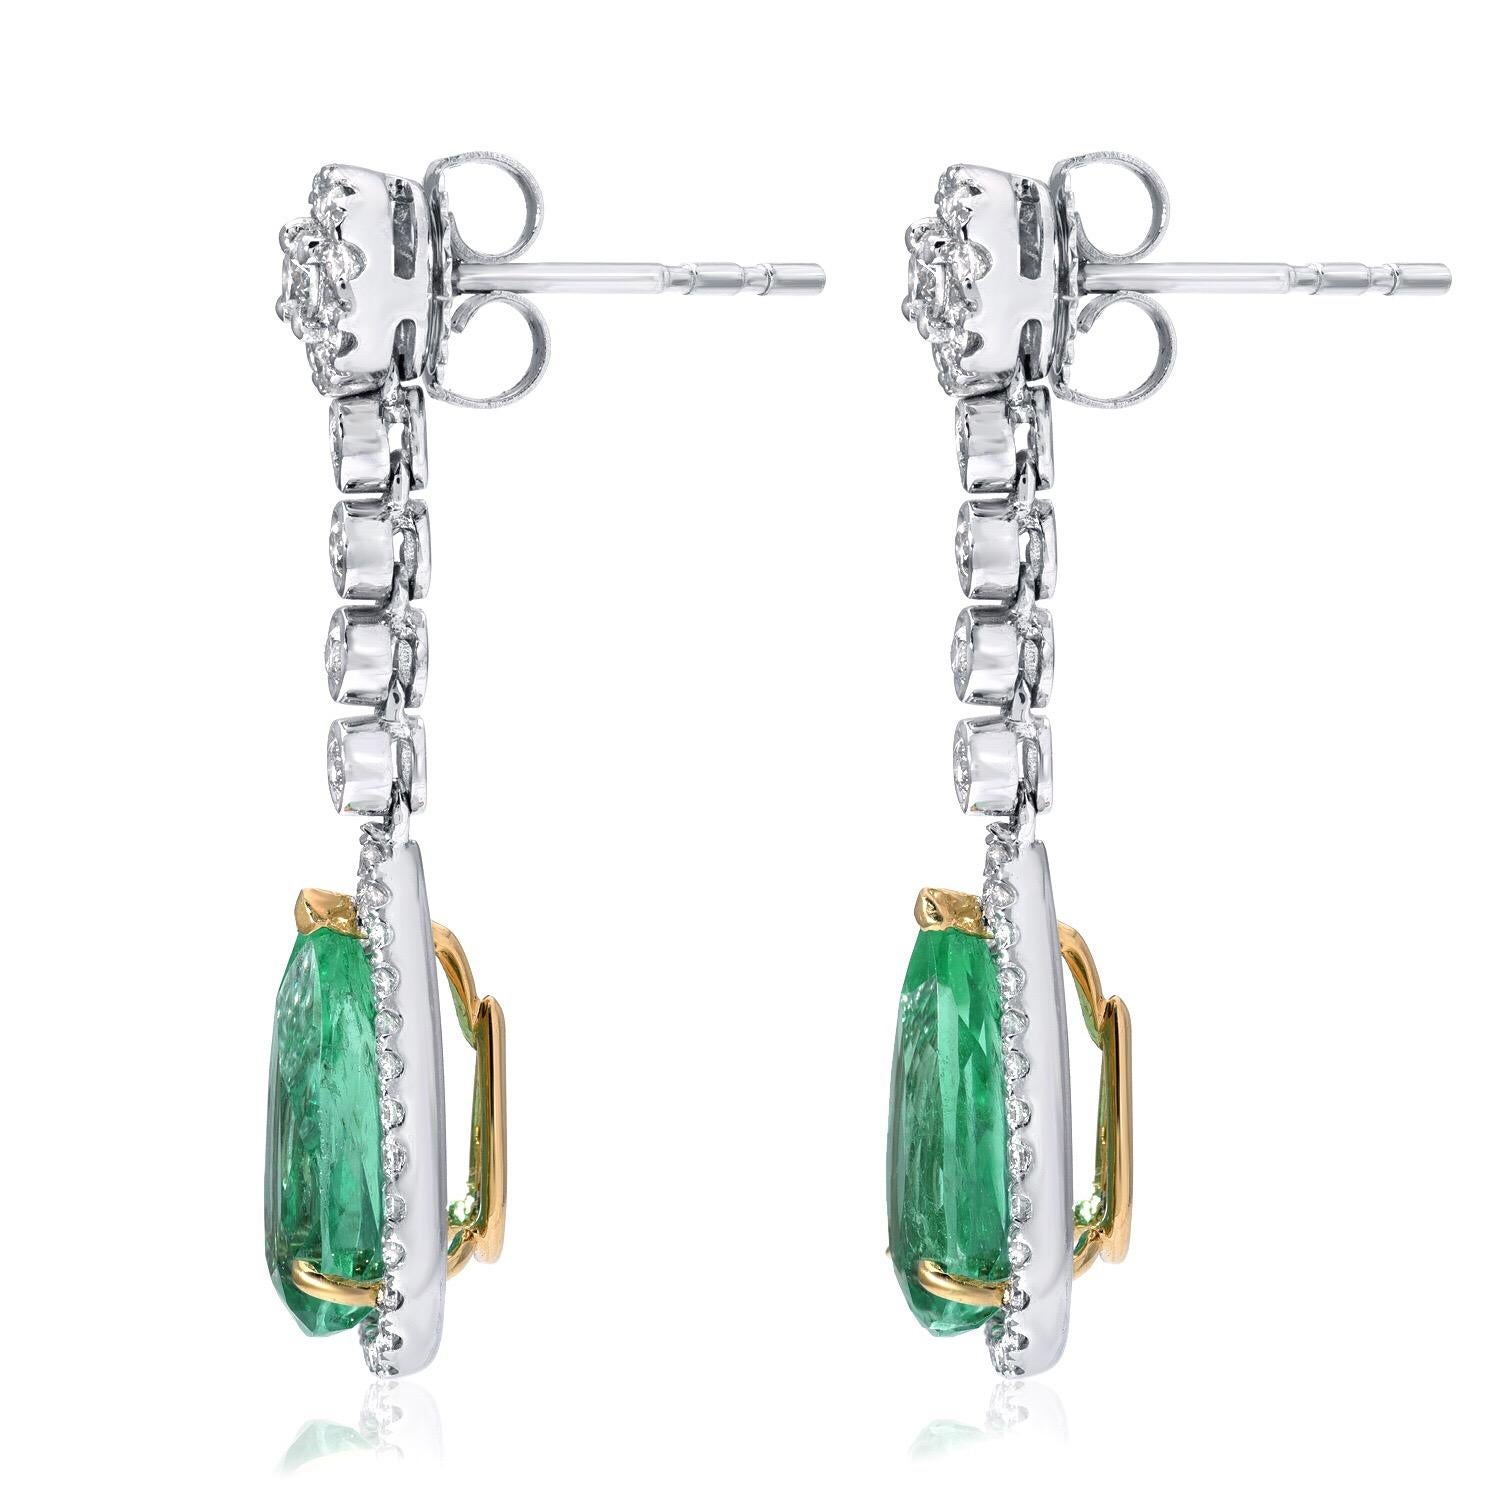 Colombian Emerald earrings featuring a pair of 4.61 carats total pear shape Emeralds, adorned by a total of 0.92 carats of round brilliant diamonds. These drop Emerald earrings are crafted in 18K white gold and 18K yellow gold.
Total length: Approx.